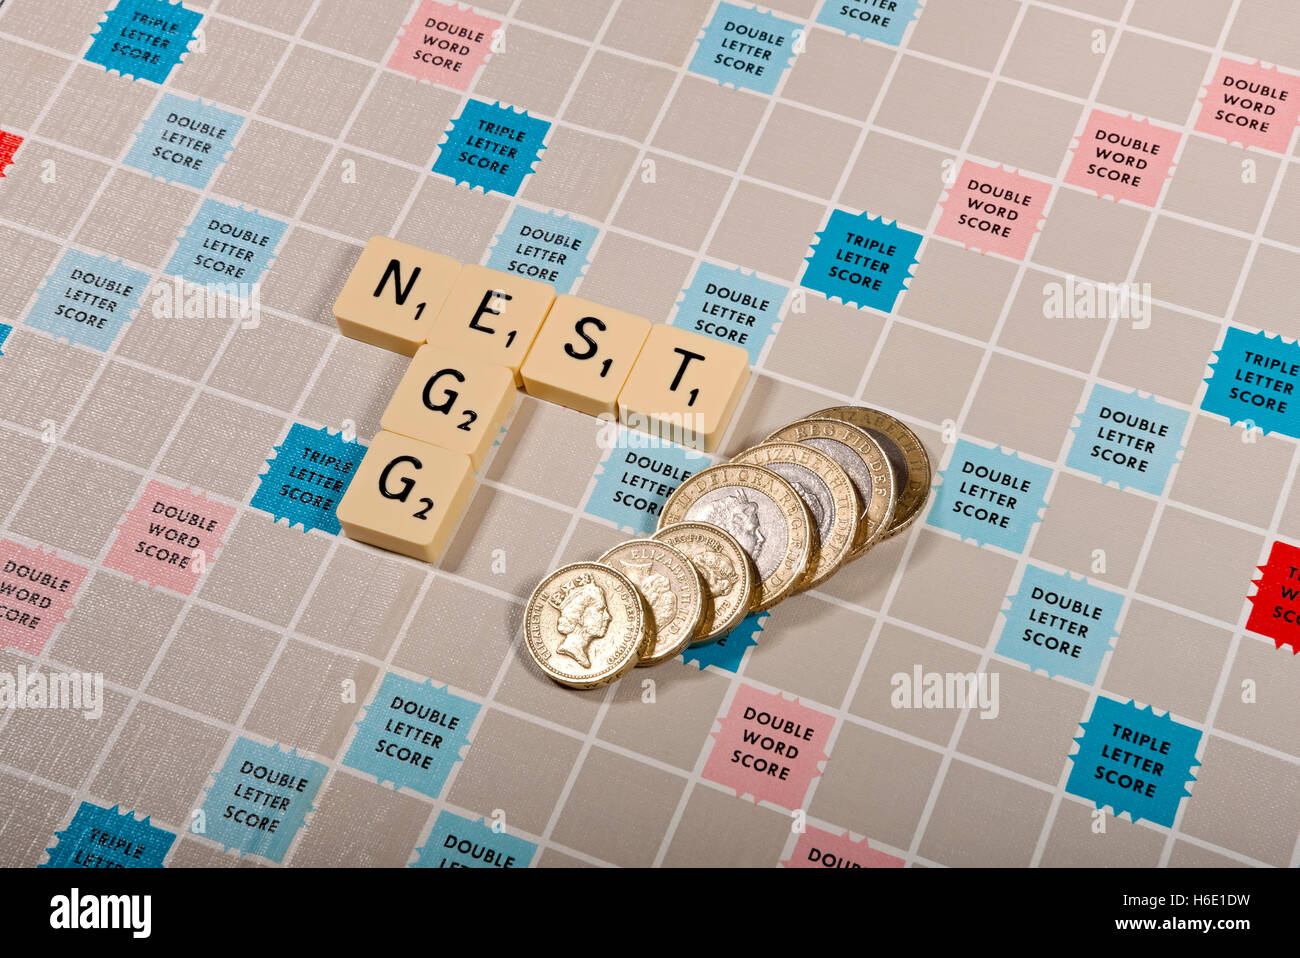 Scrabble board and tiles personal finance business money concept England UK United Kingdom GB Great Britain Stock Photo